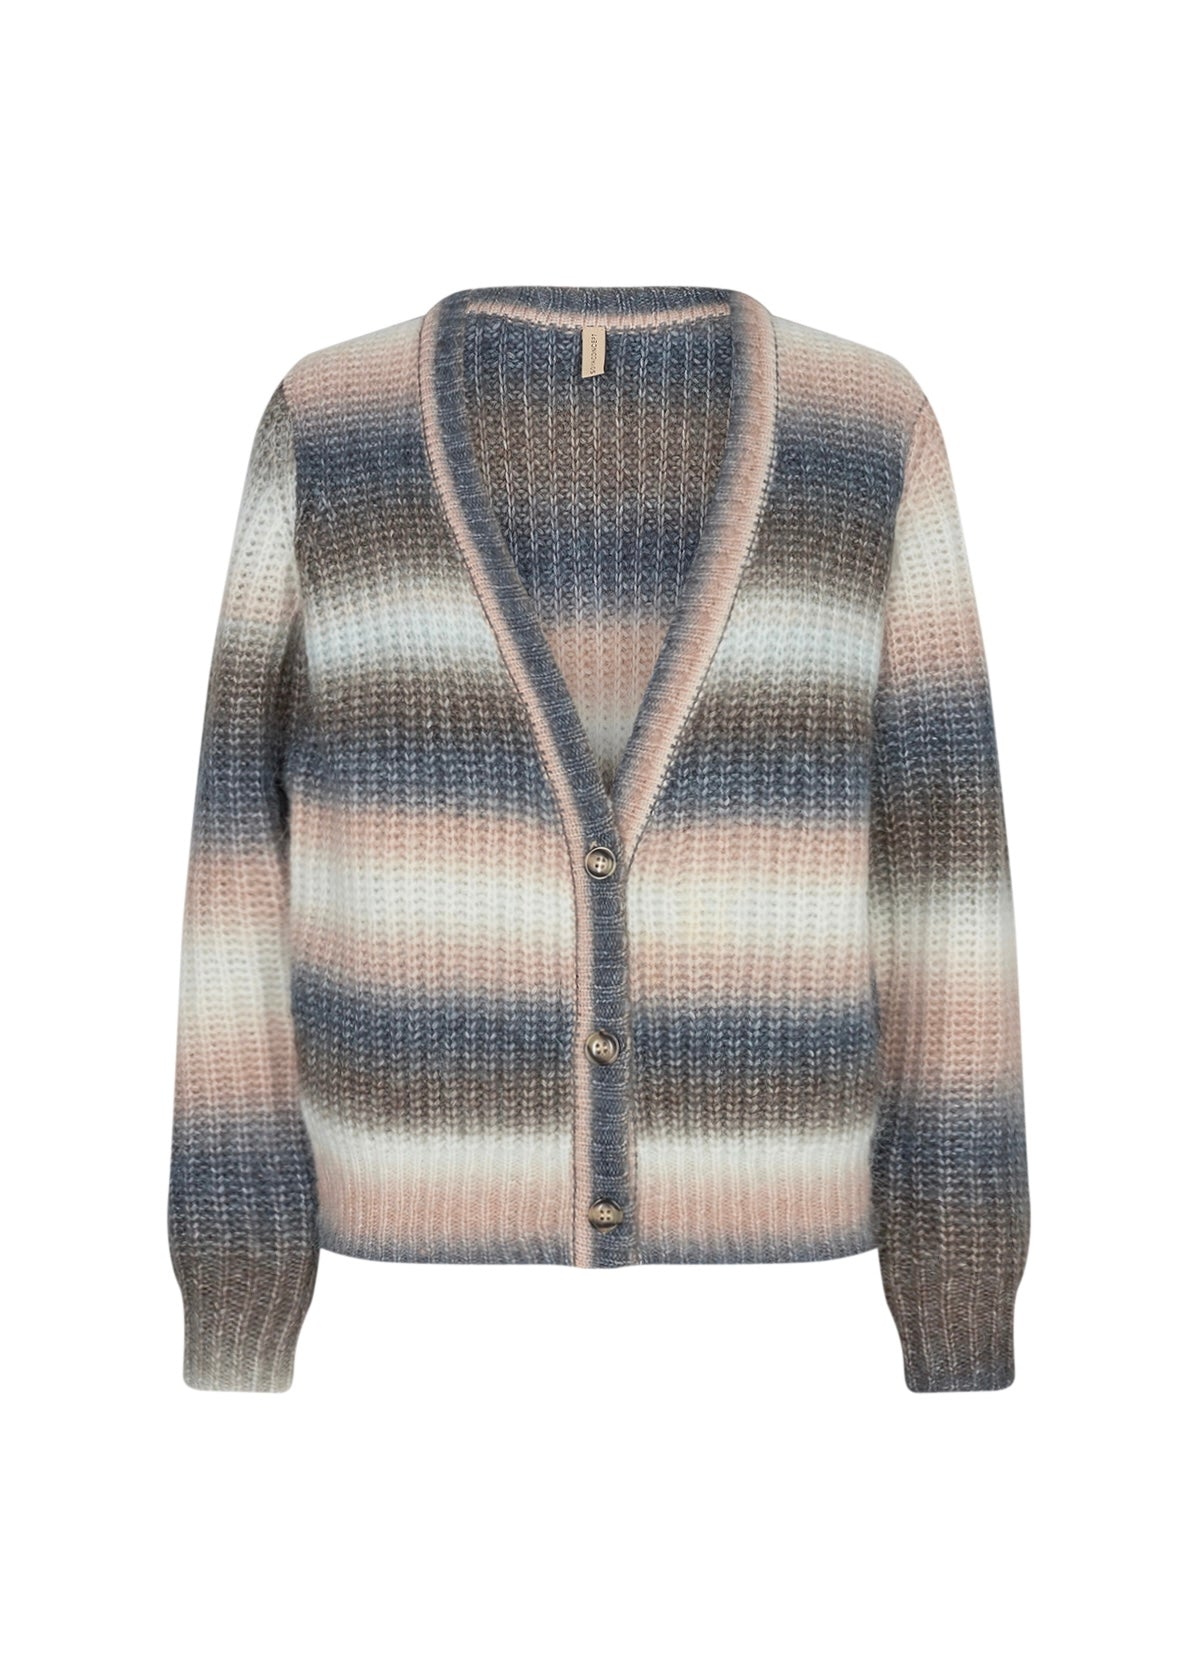 SoyaConcept - Aisa 2 Knitted Cardigan *LAST ONE*